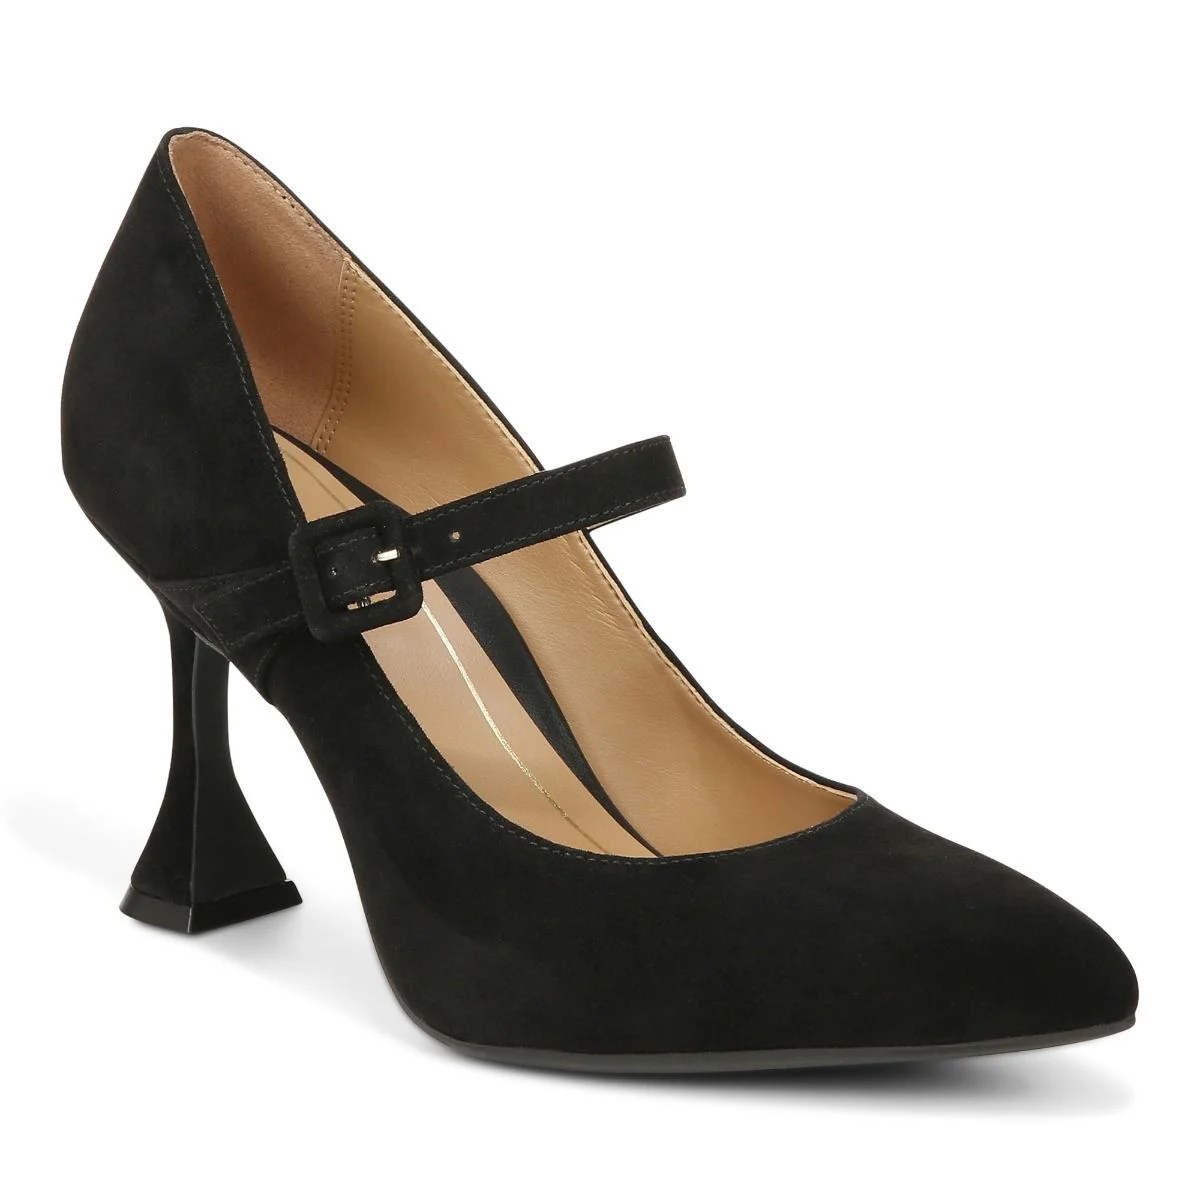 vionic collette black suede mary jane heel, one of the best orthopedic shoes for women